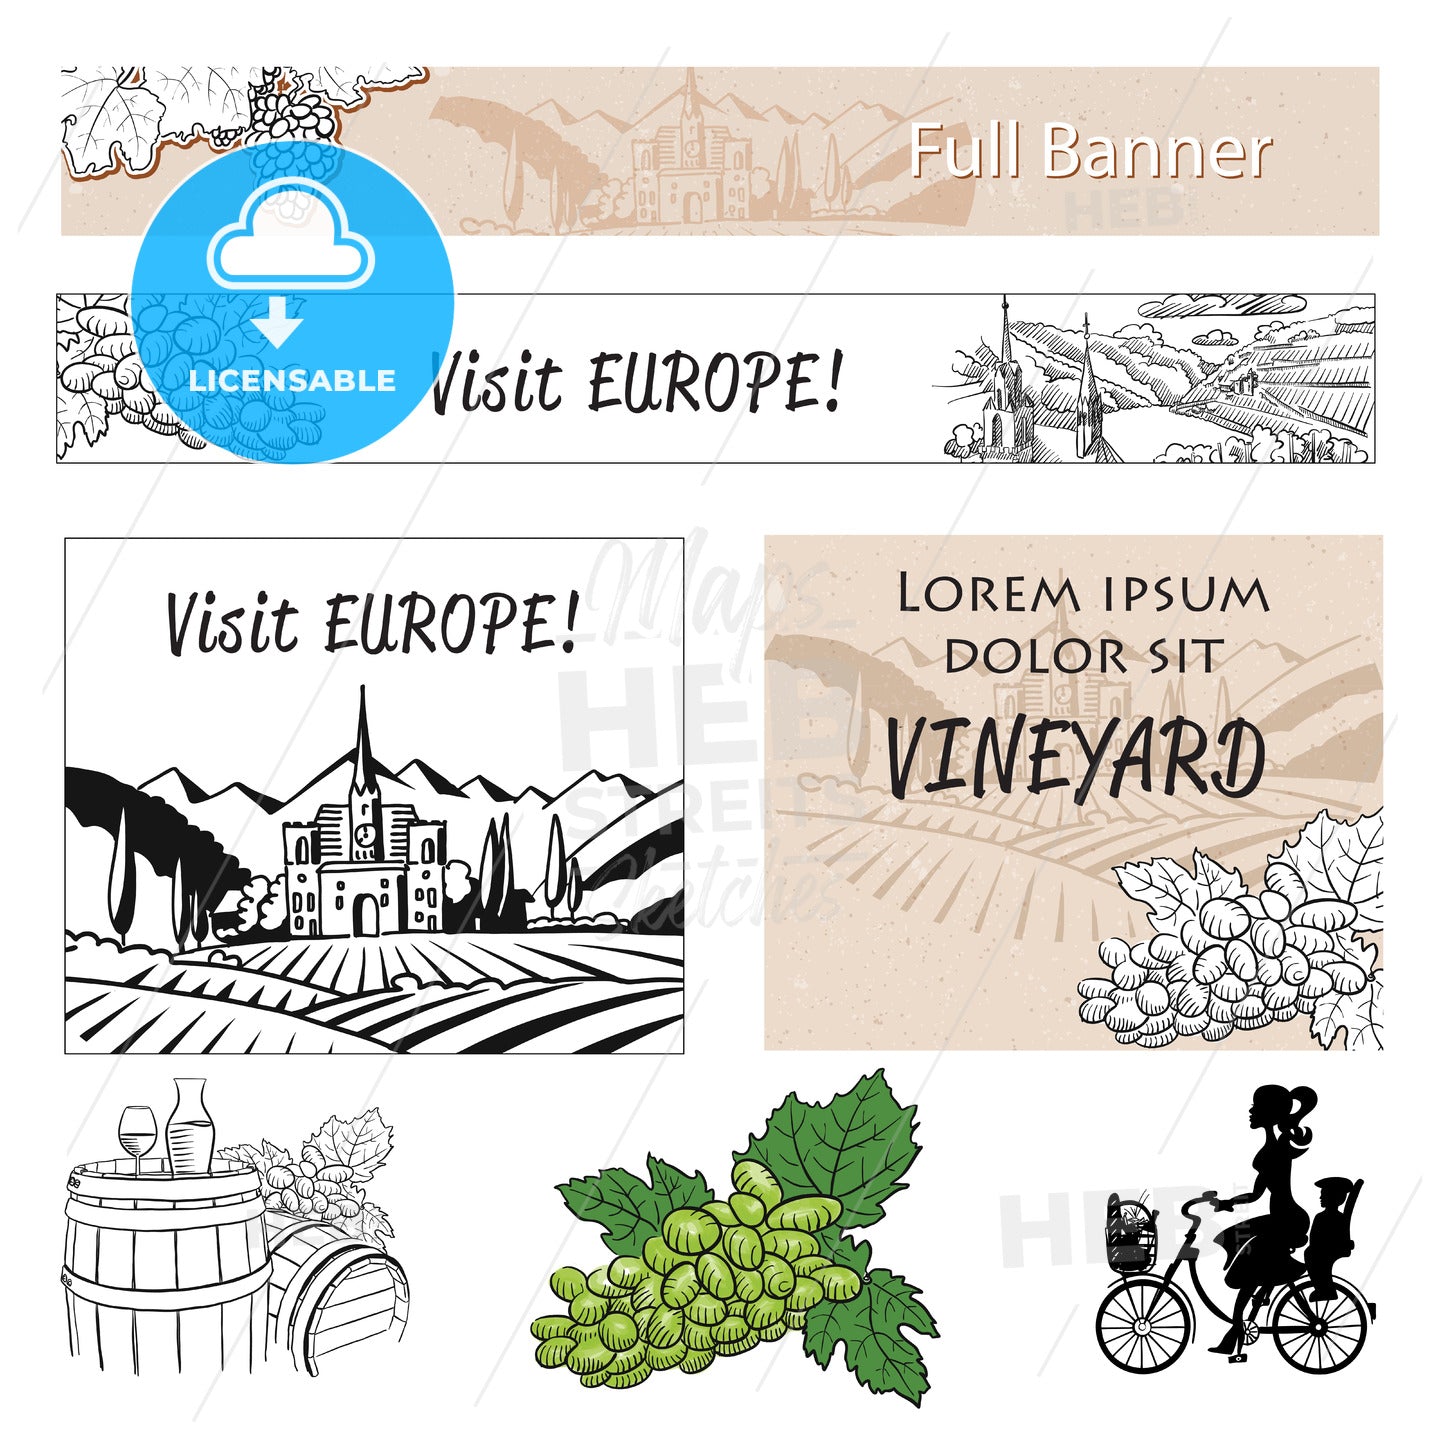 Vineyard Travel Banner Assets and Concept Layout – instant download